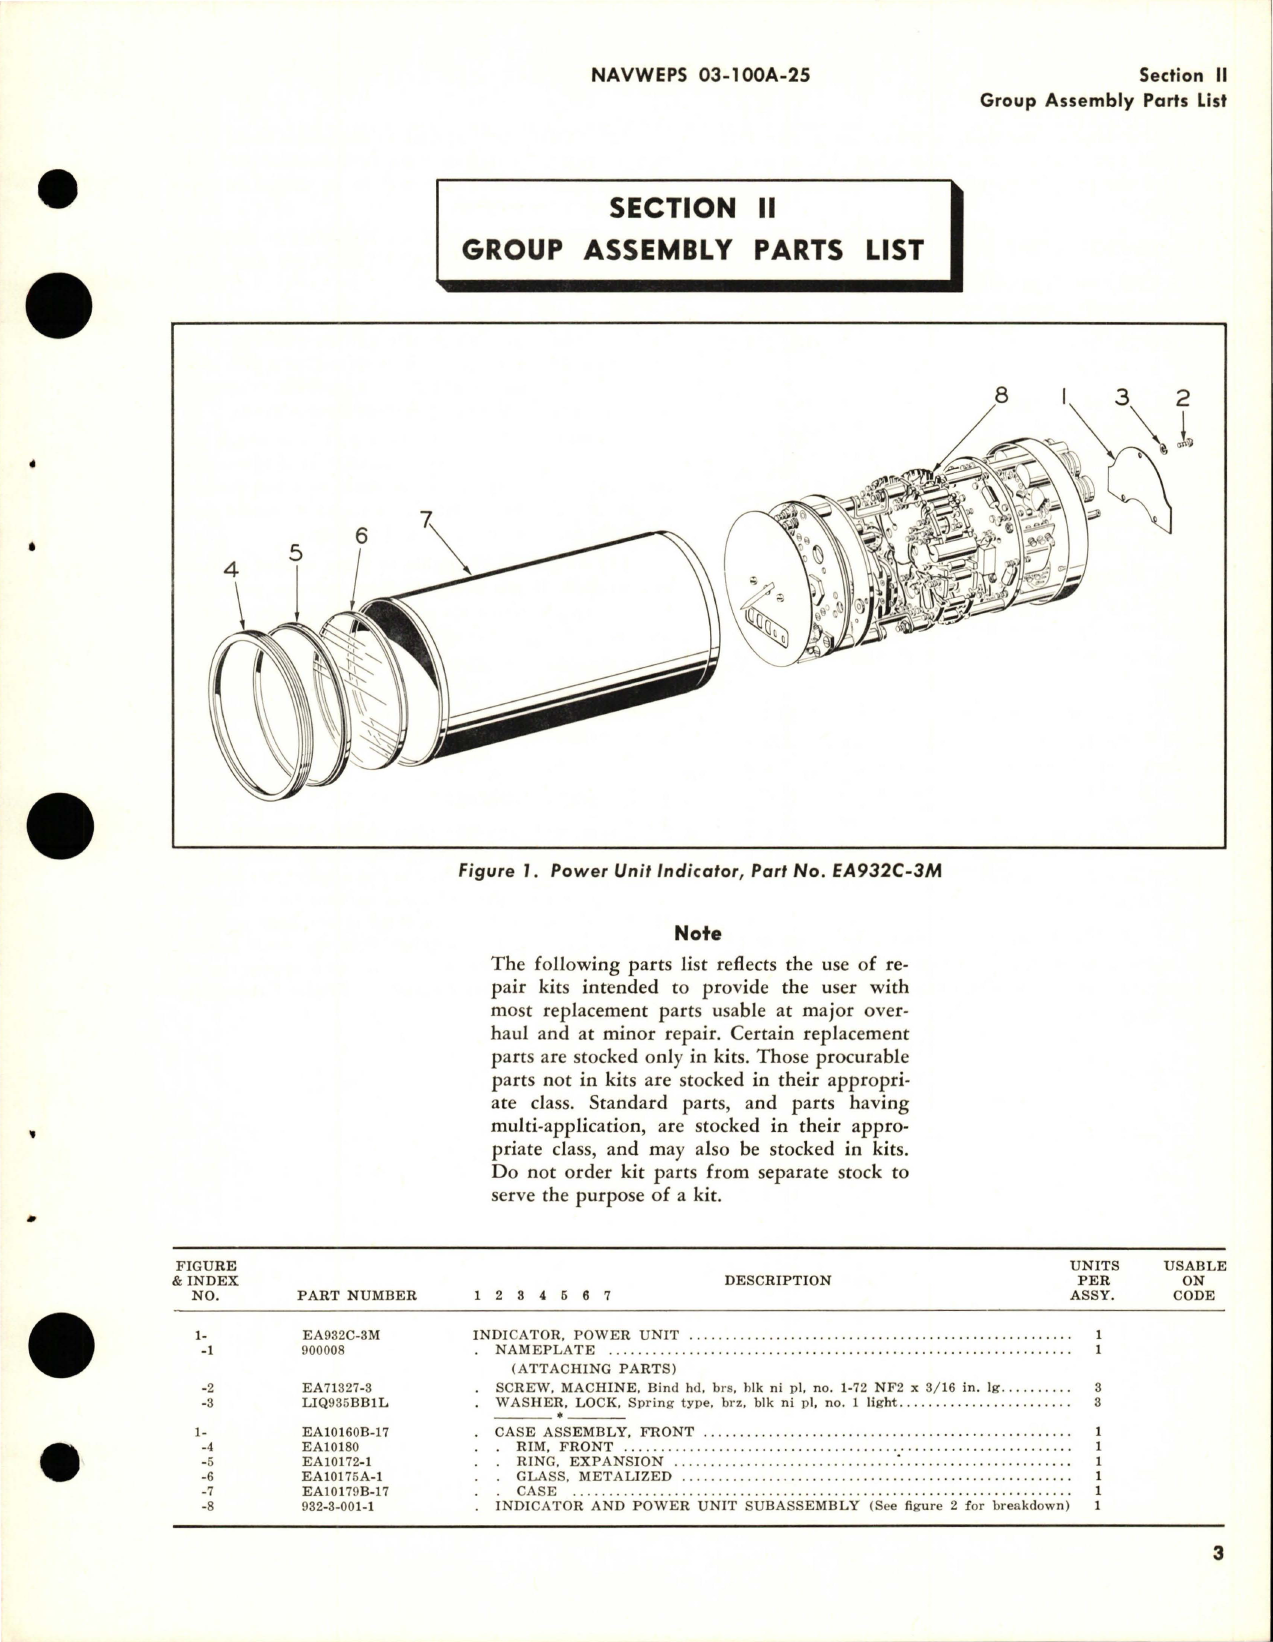 Sample page 7 from AirCorps Library document: Illustrated Parts Breakdown for Indicator-Power Unit - Part EA932C-3M 